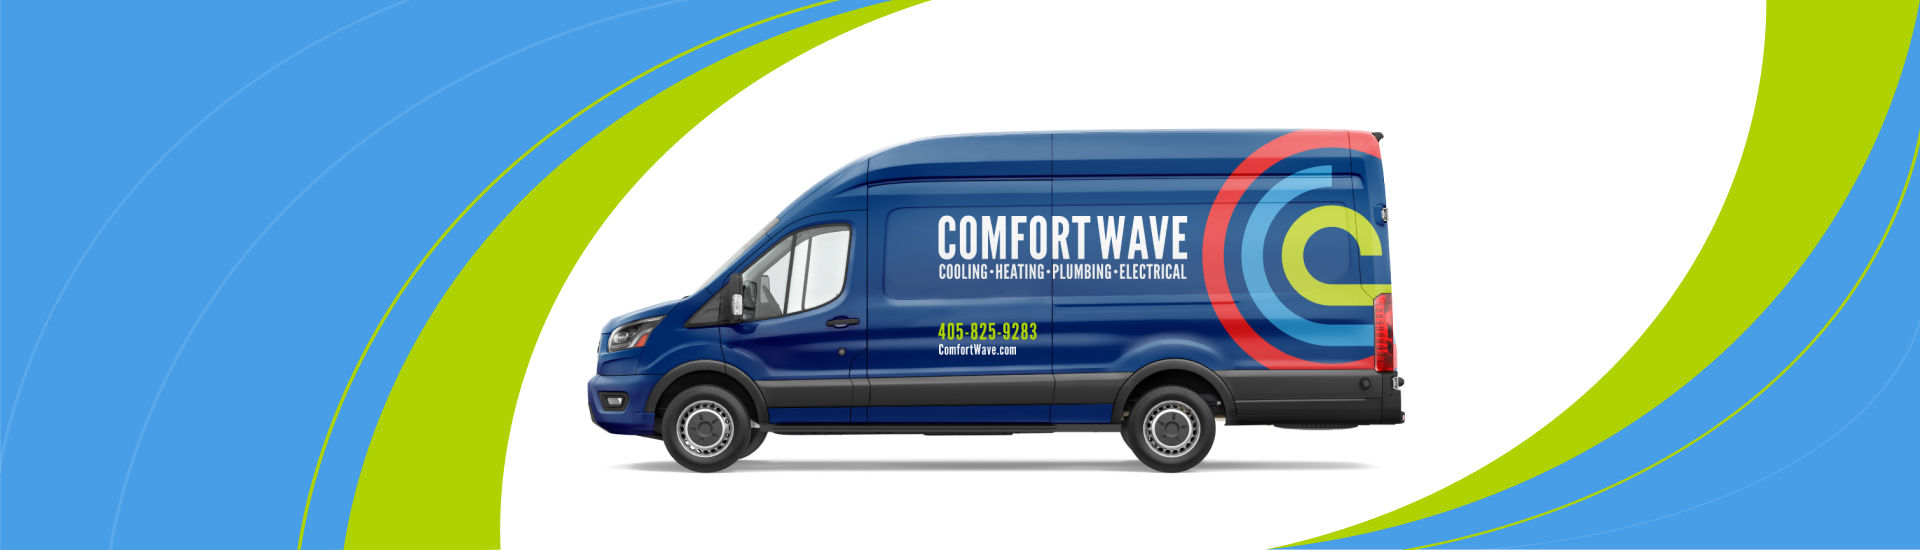 Comfort Wave Home Services vehicle